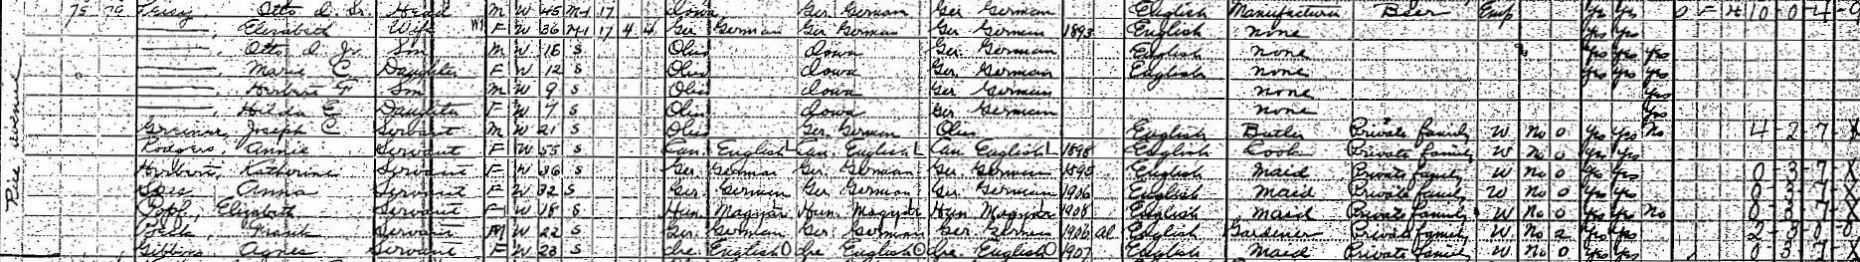 Beer baron Otto Leisy, who lived in a 36-room mansion on a 70-acre estate on Fairmount Road, signed the 1911 petition. Click to see the full form.